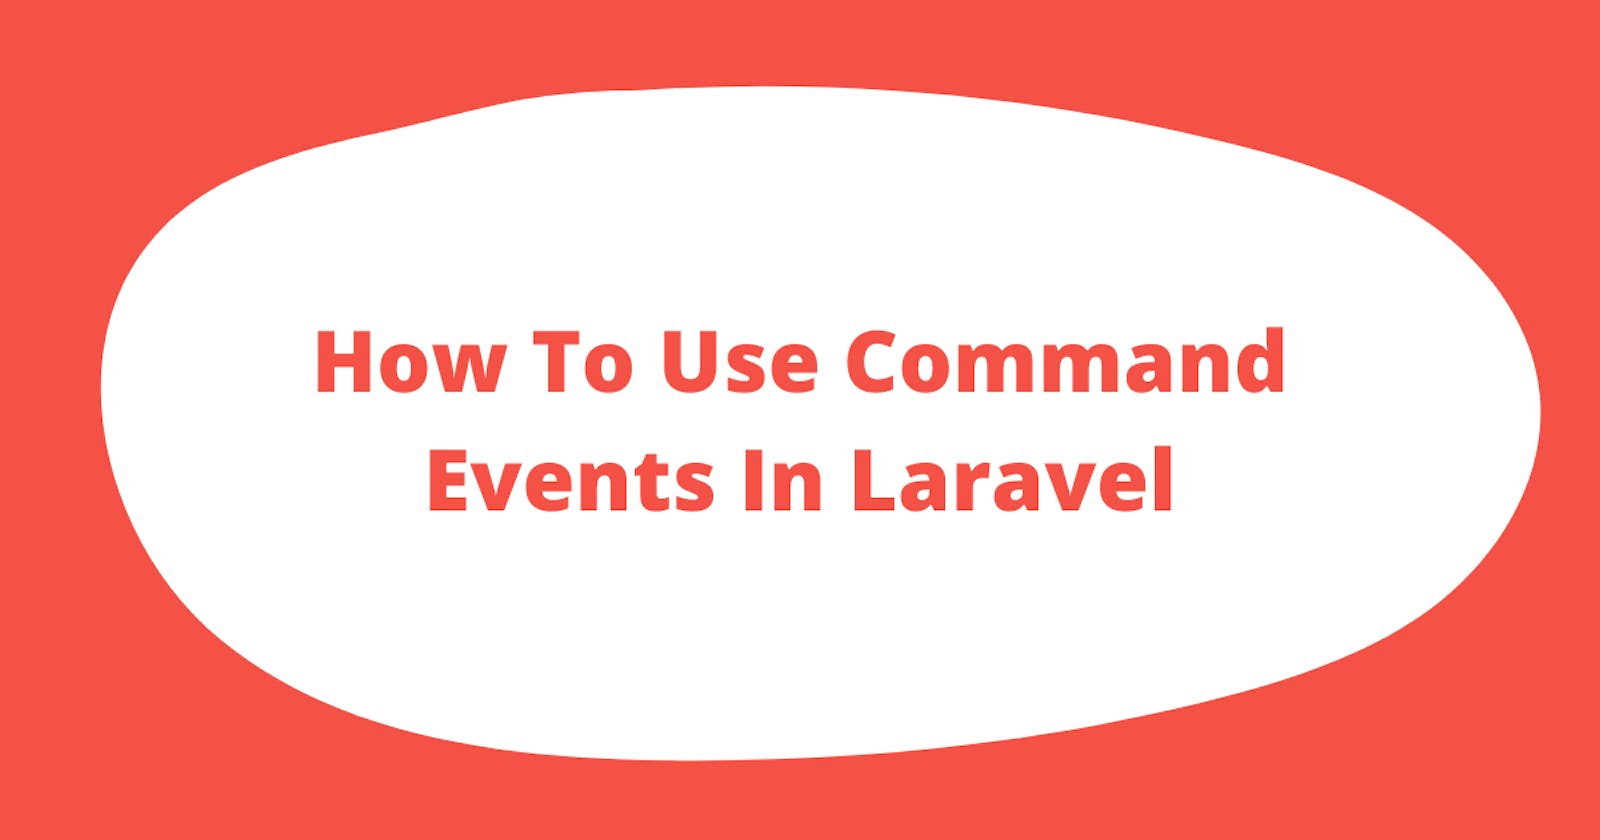 How To Use Command Events In Laravel